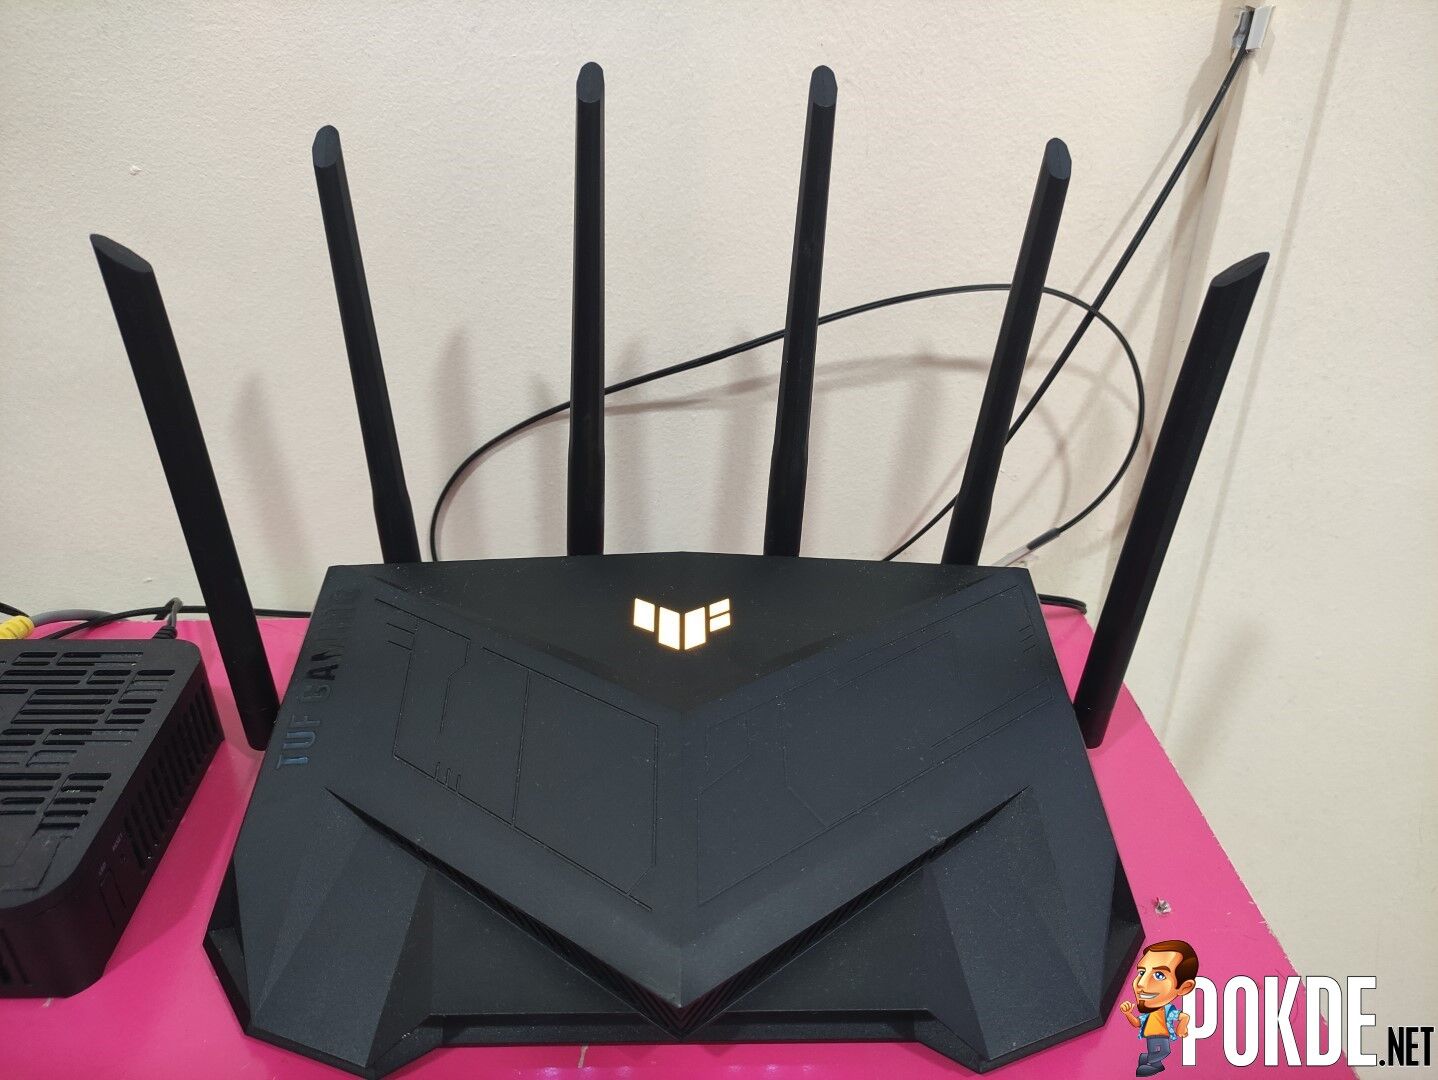 ASUS TUF Gaming AX5400 Router Review - Budget Friendly Router For Your Gaming Needs 25